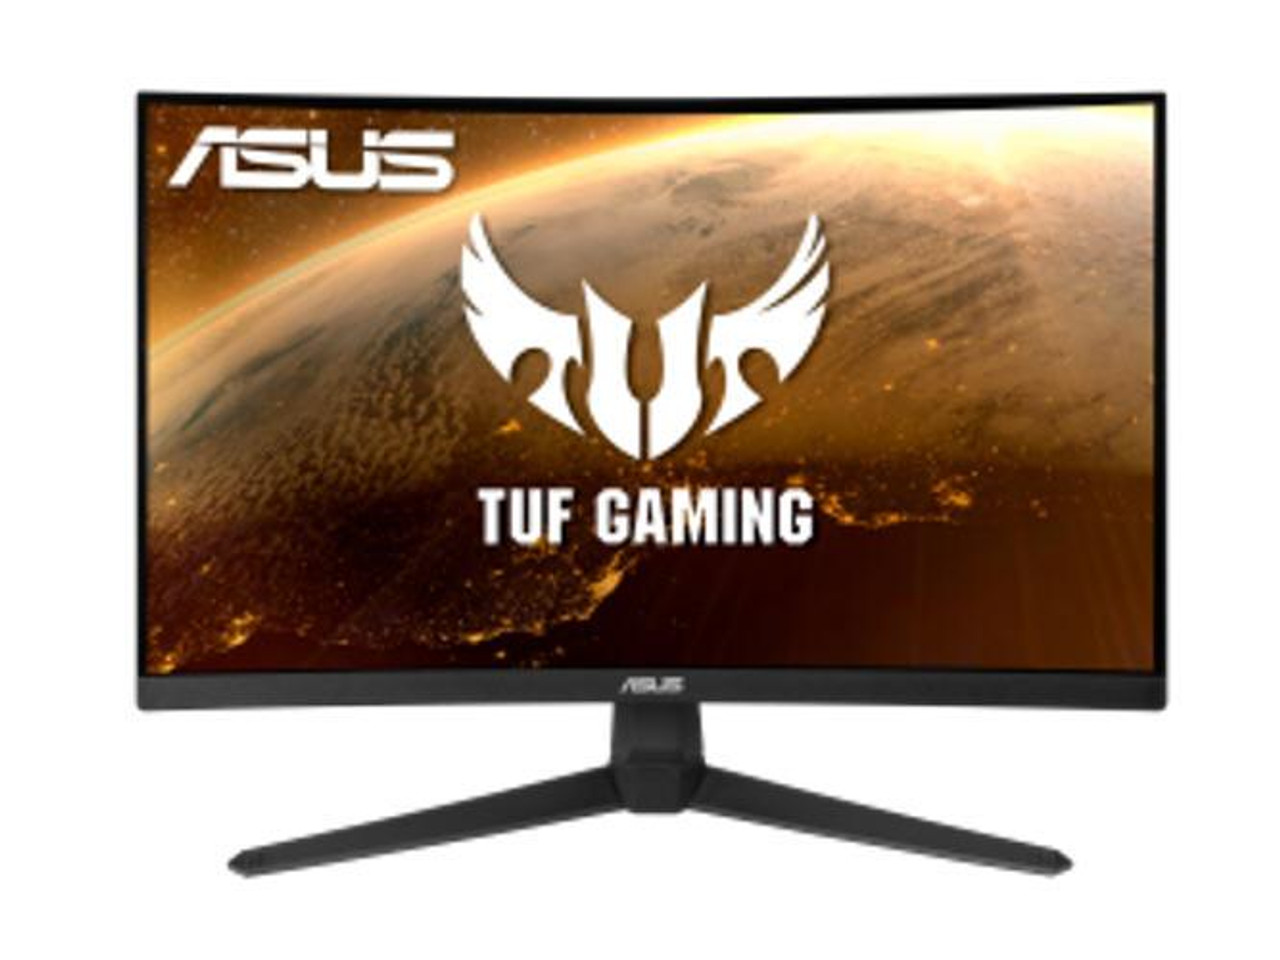 ASUS TUF Gaming 23.8in. 1080P Curved Gaming Monitor VG24VQ1B Full HD, 165Hz Supports 144Hz, 1ms, Extreme Low Motion Blur, Speakers, Adaptive-sync,FreeSync Premium, Eye Care, DisplayPort, HDMI